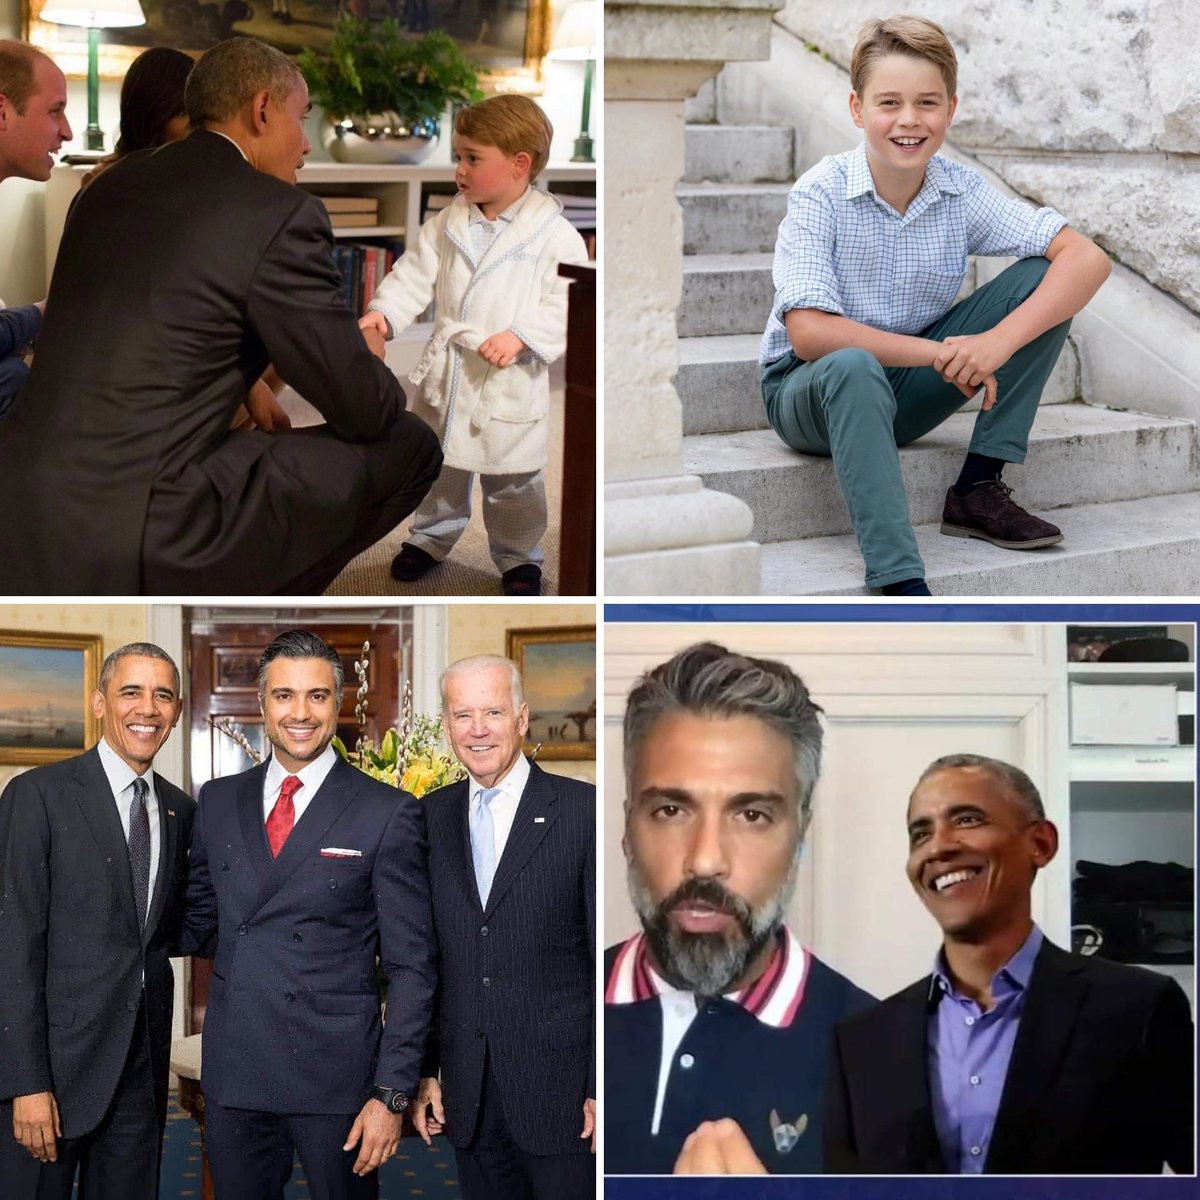 Hi Camilocas! #PrinceGeorge10 is trending worldwide! Let's get #JaimeCamil50 trending too! 🤩 Prince George and Nuestro Principe @jaimecamil have so much in common besides their birthdays! They're both Royals in our eyes! And they've both met President Obama! How cool is that! 🎈